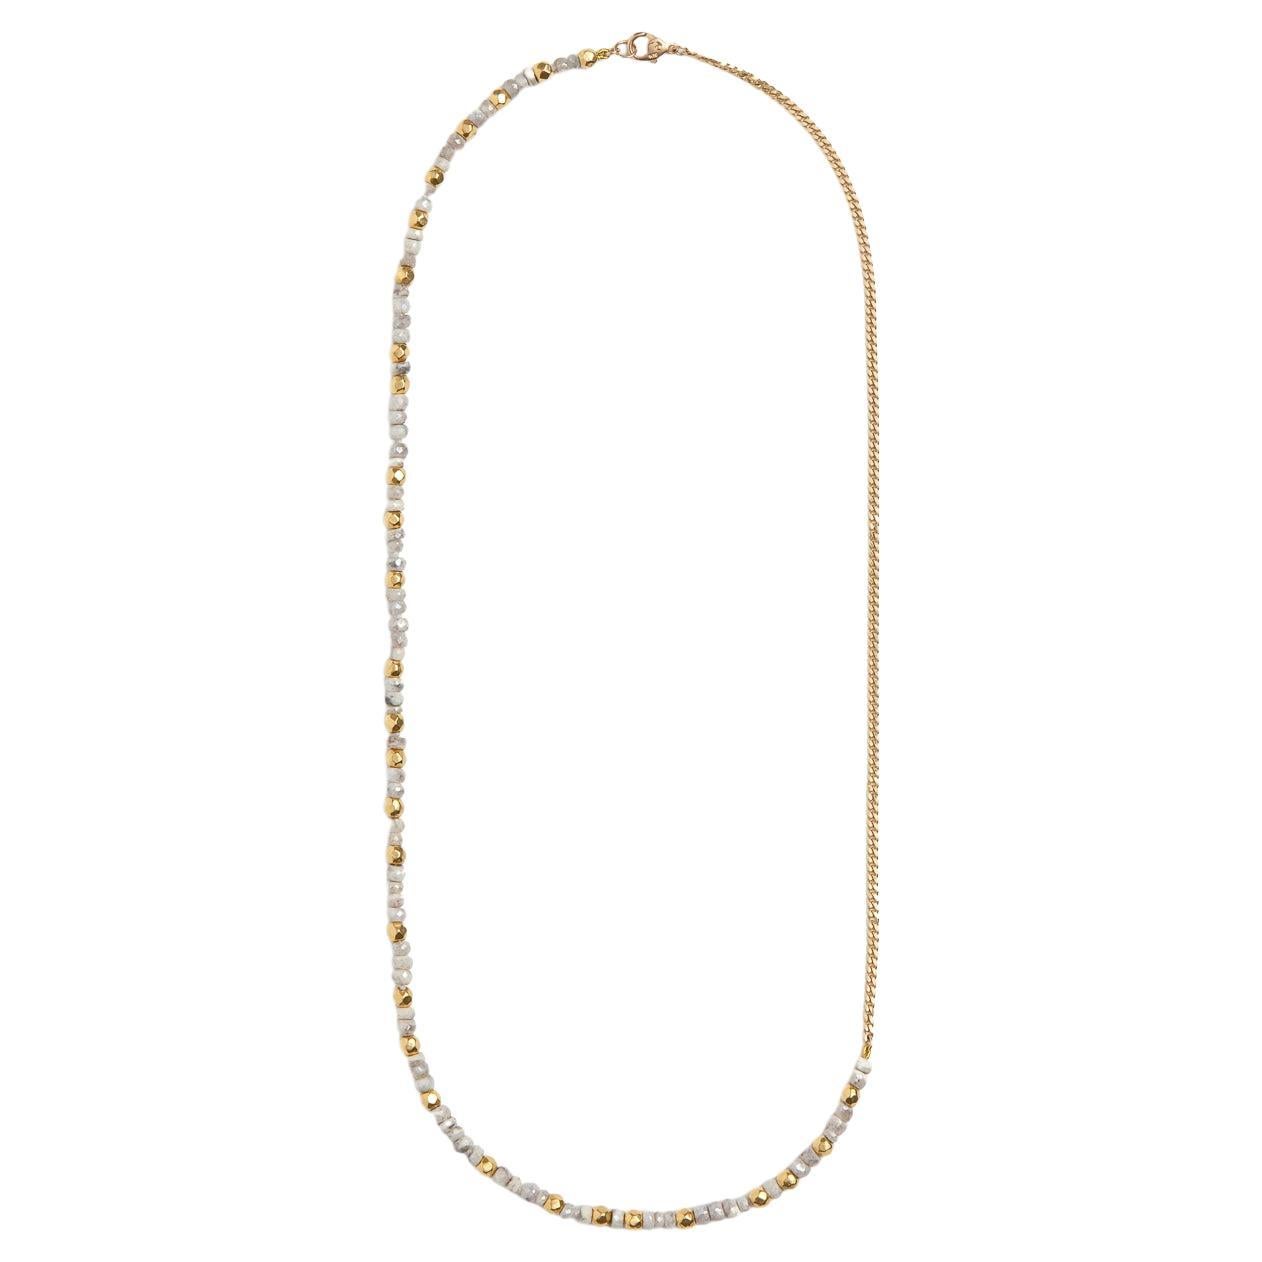 Hand-knotted beaded necklace composed of midnight blue sapphire beads and 18k yellow gold beads, set on an 18k yellow gold curb chain. 
 
18 inches long
Blue sapphire beads
18k gold beads
18k yellow gold chain

Designed by Objet-a, hand-crafted in